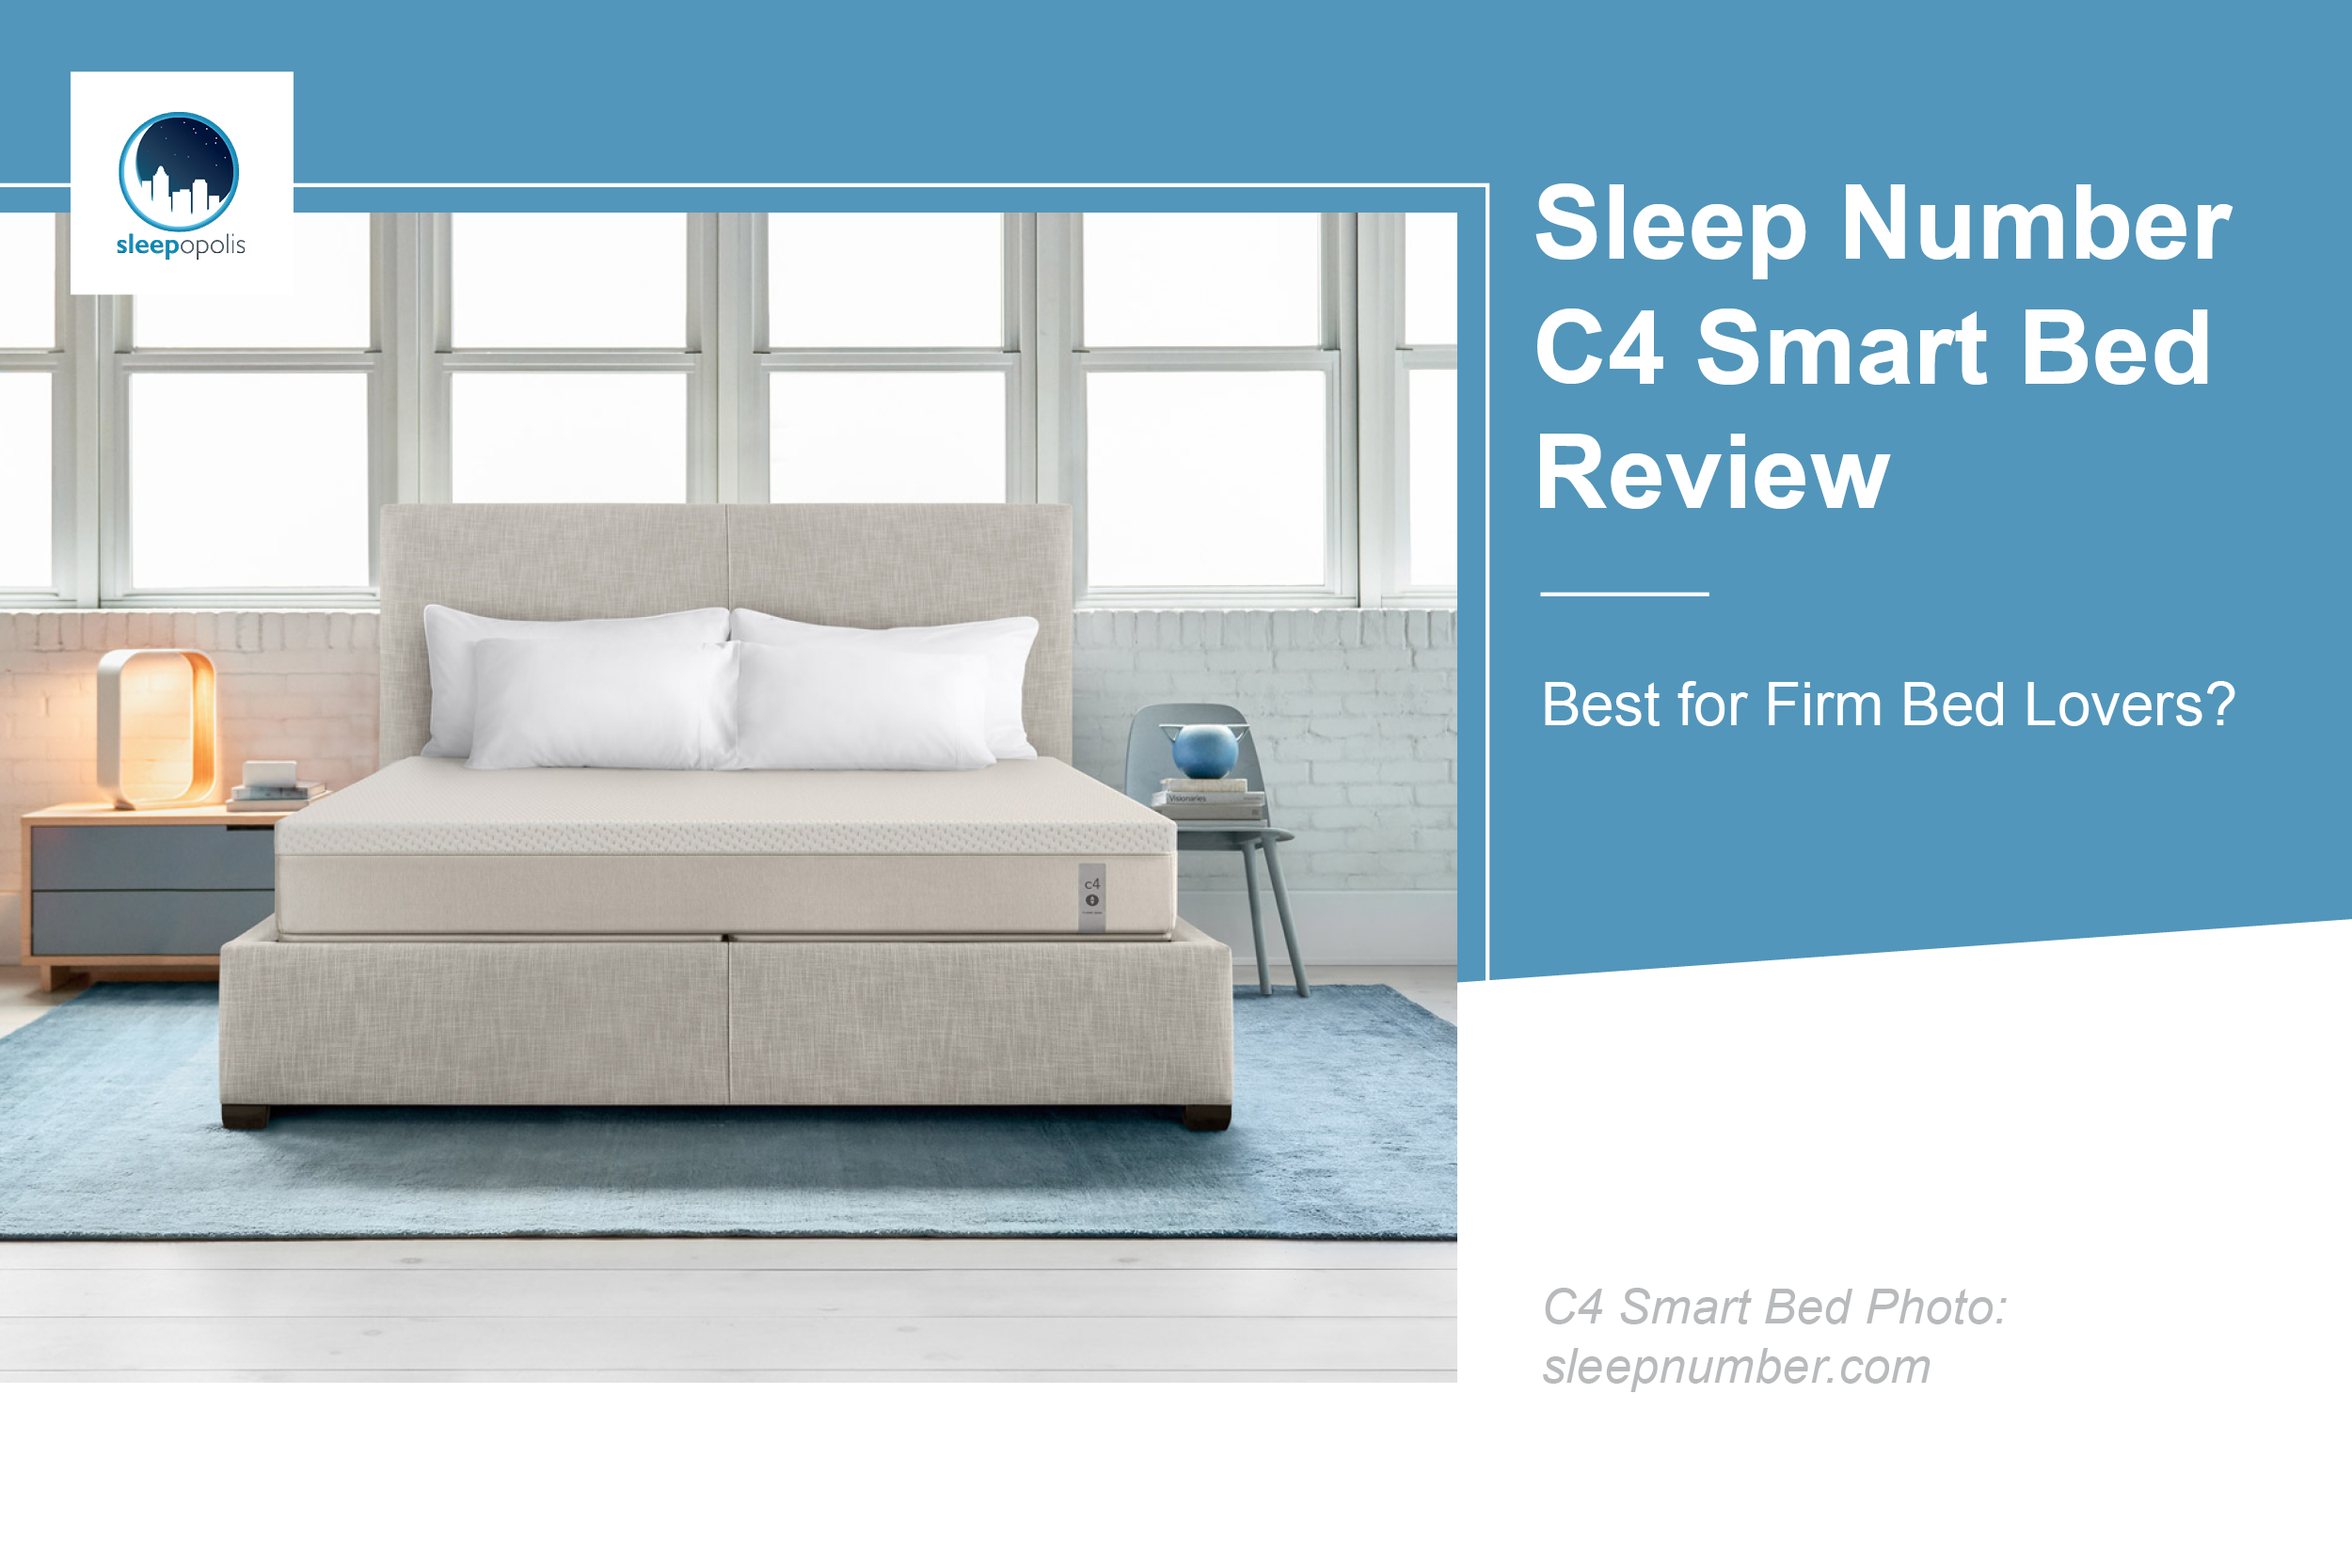 Sleep Number 360 C4 Smart Bed Review, Sleep Number 360 Smart Bed Sizes